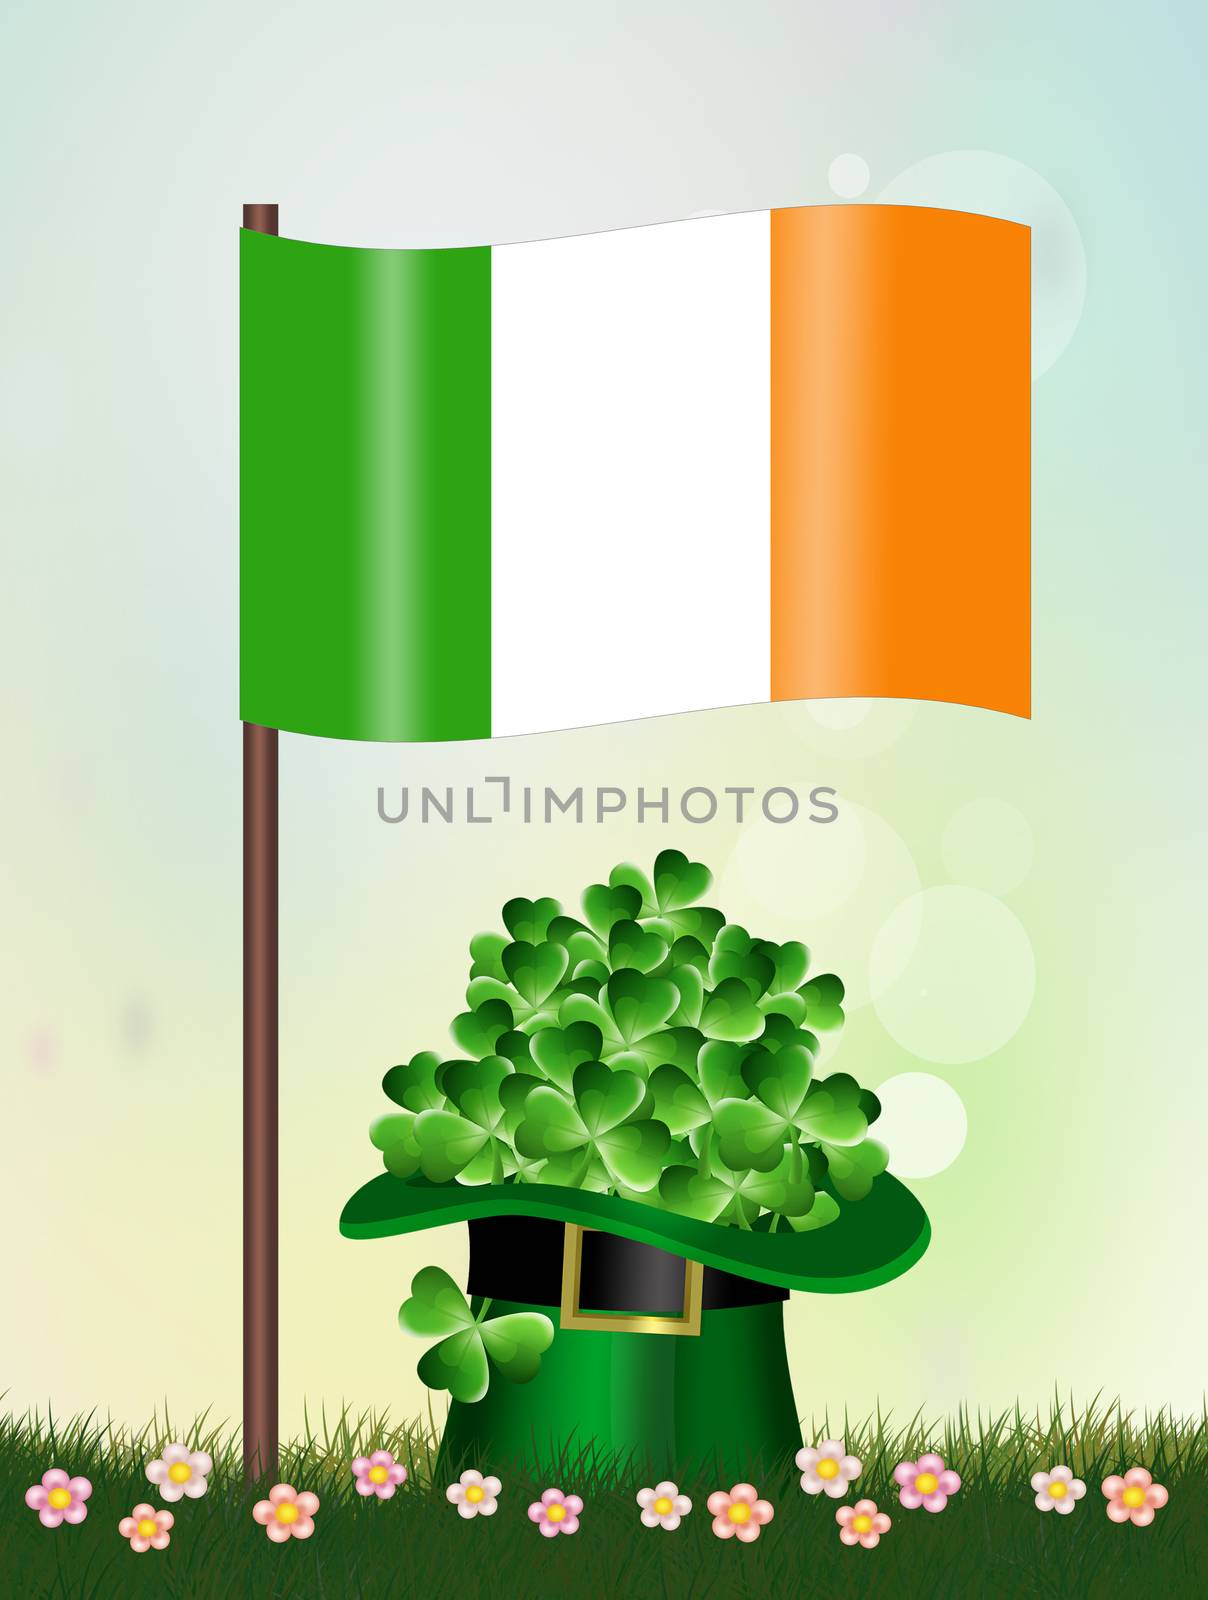 Irish flag for St. Patrick's Day by adrenalina